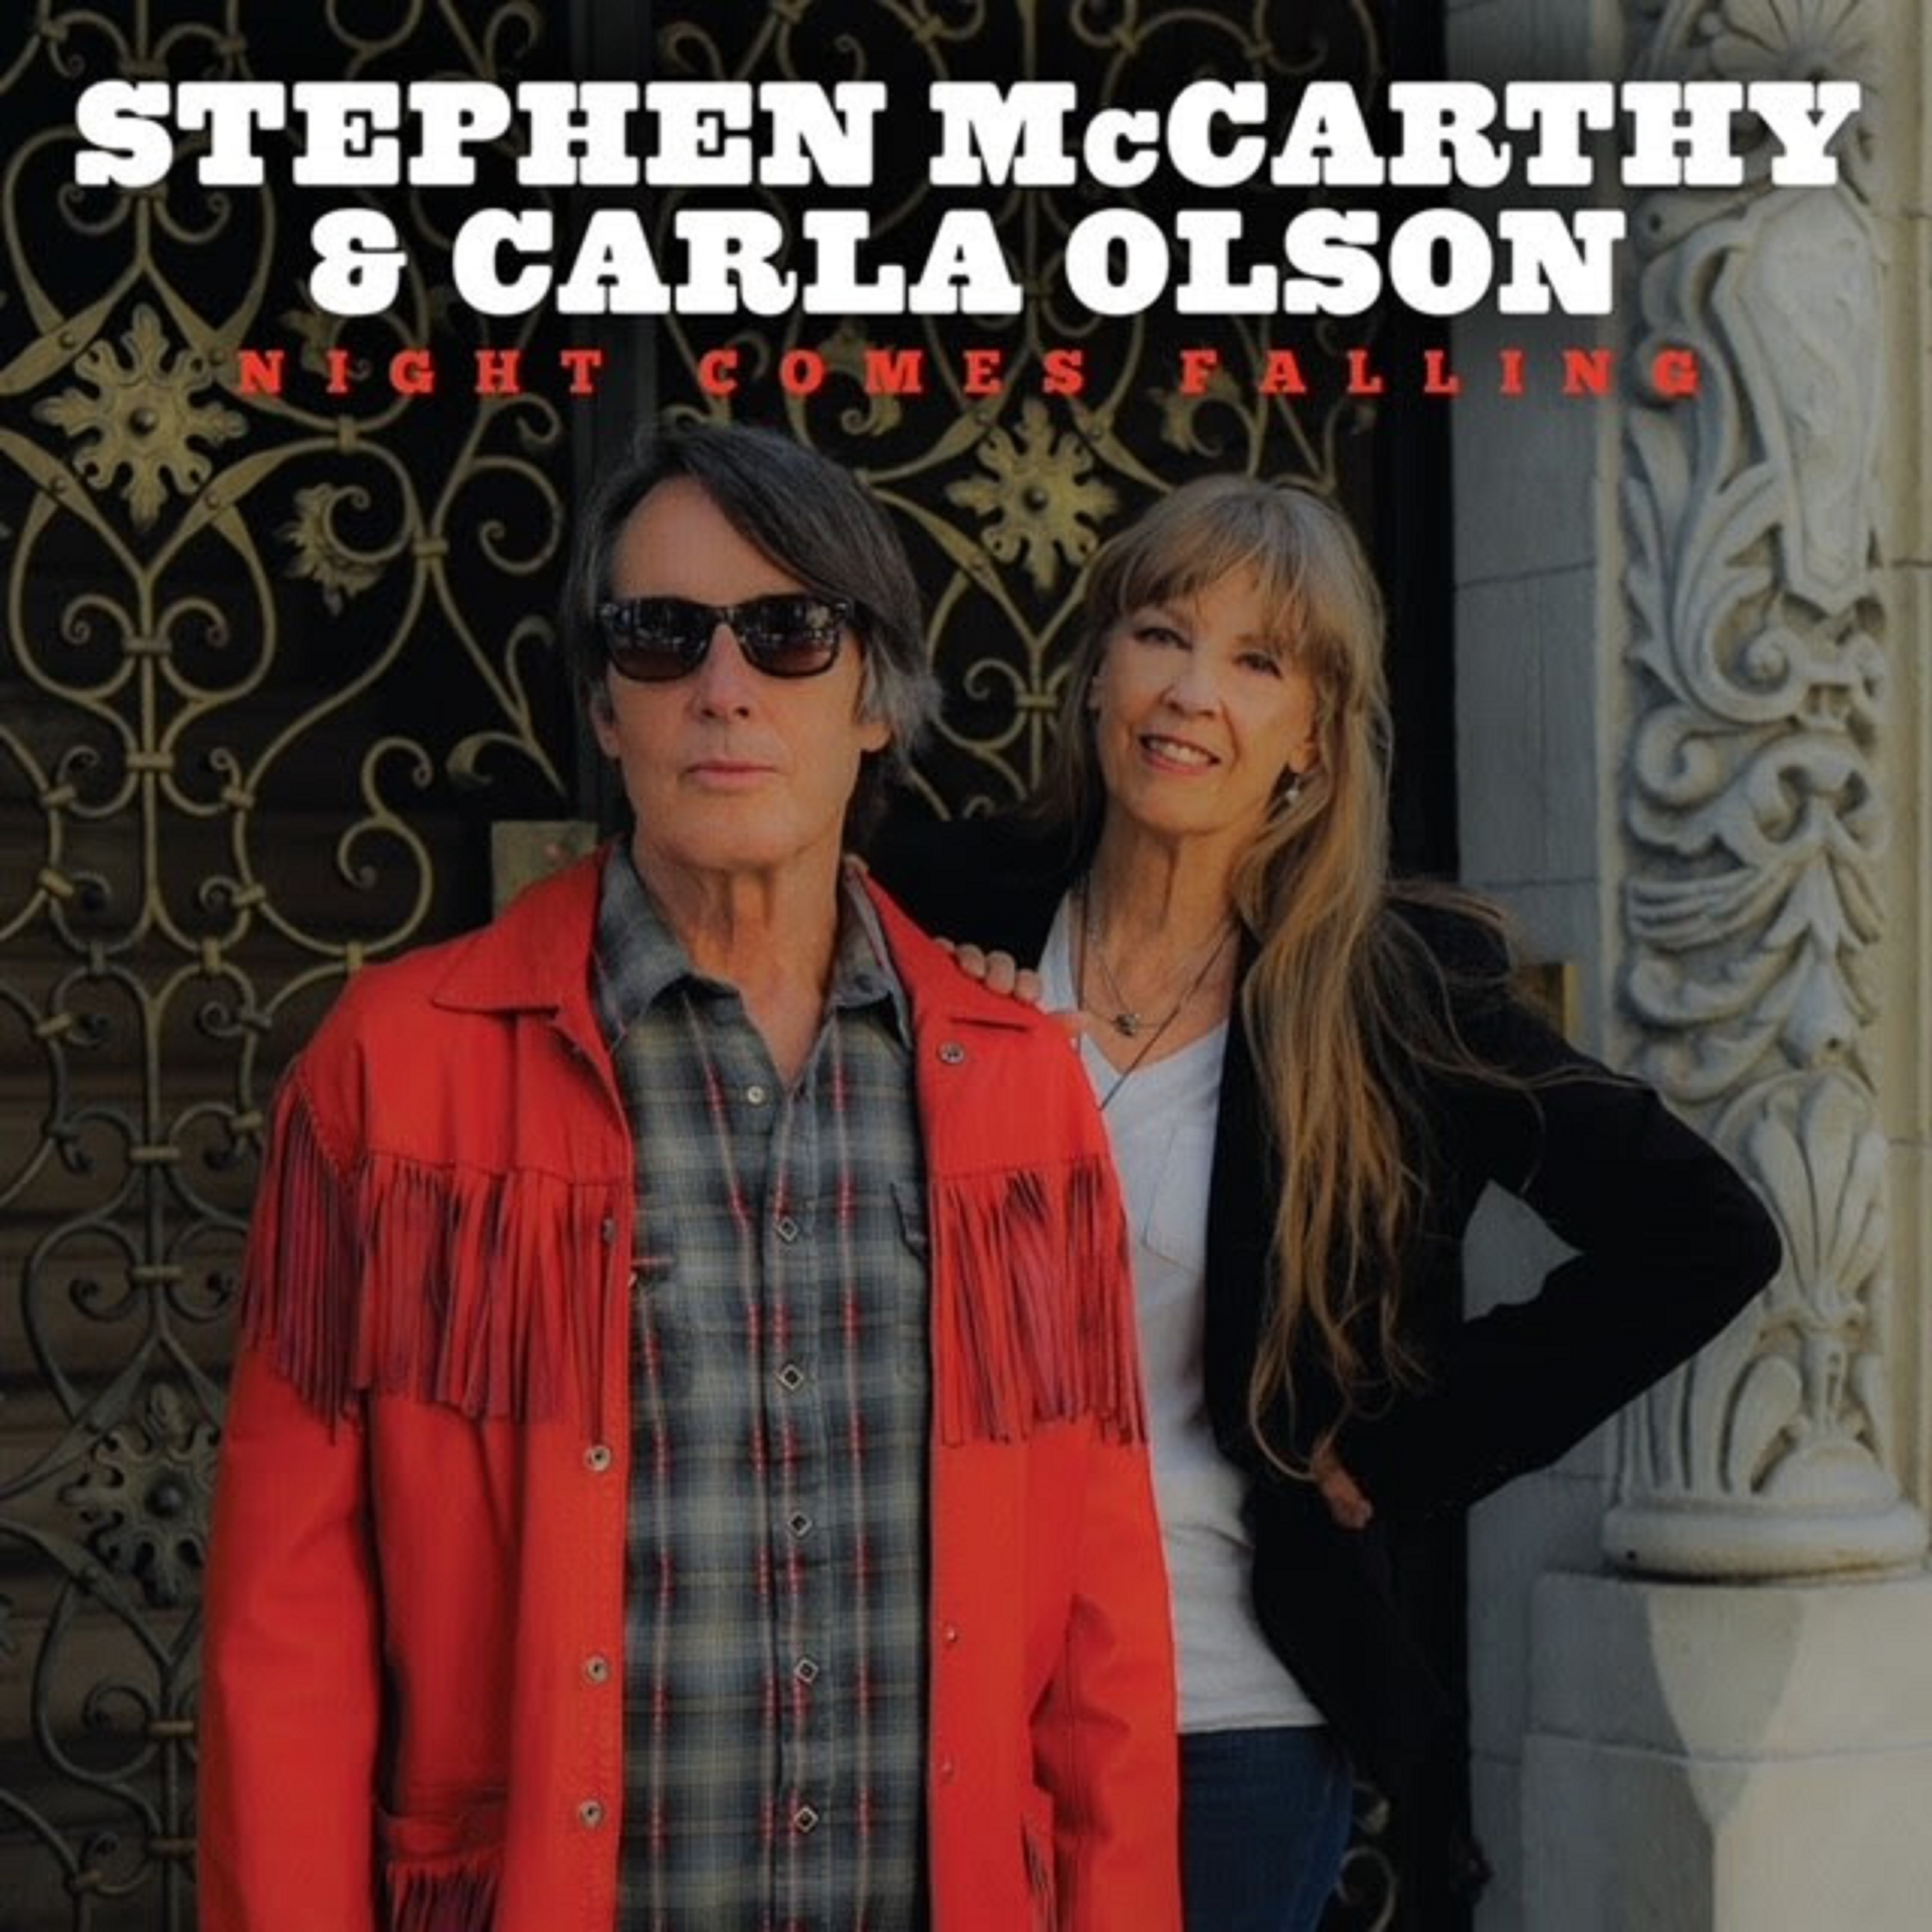 STEPHEN McCARTHY & CARLA OLSON Today Roll Out Fast-Paced And Fun Video For “WE GOTTA SPLIT THIS TOWN”—New Album Out Friday 11/11